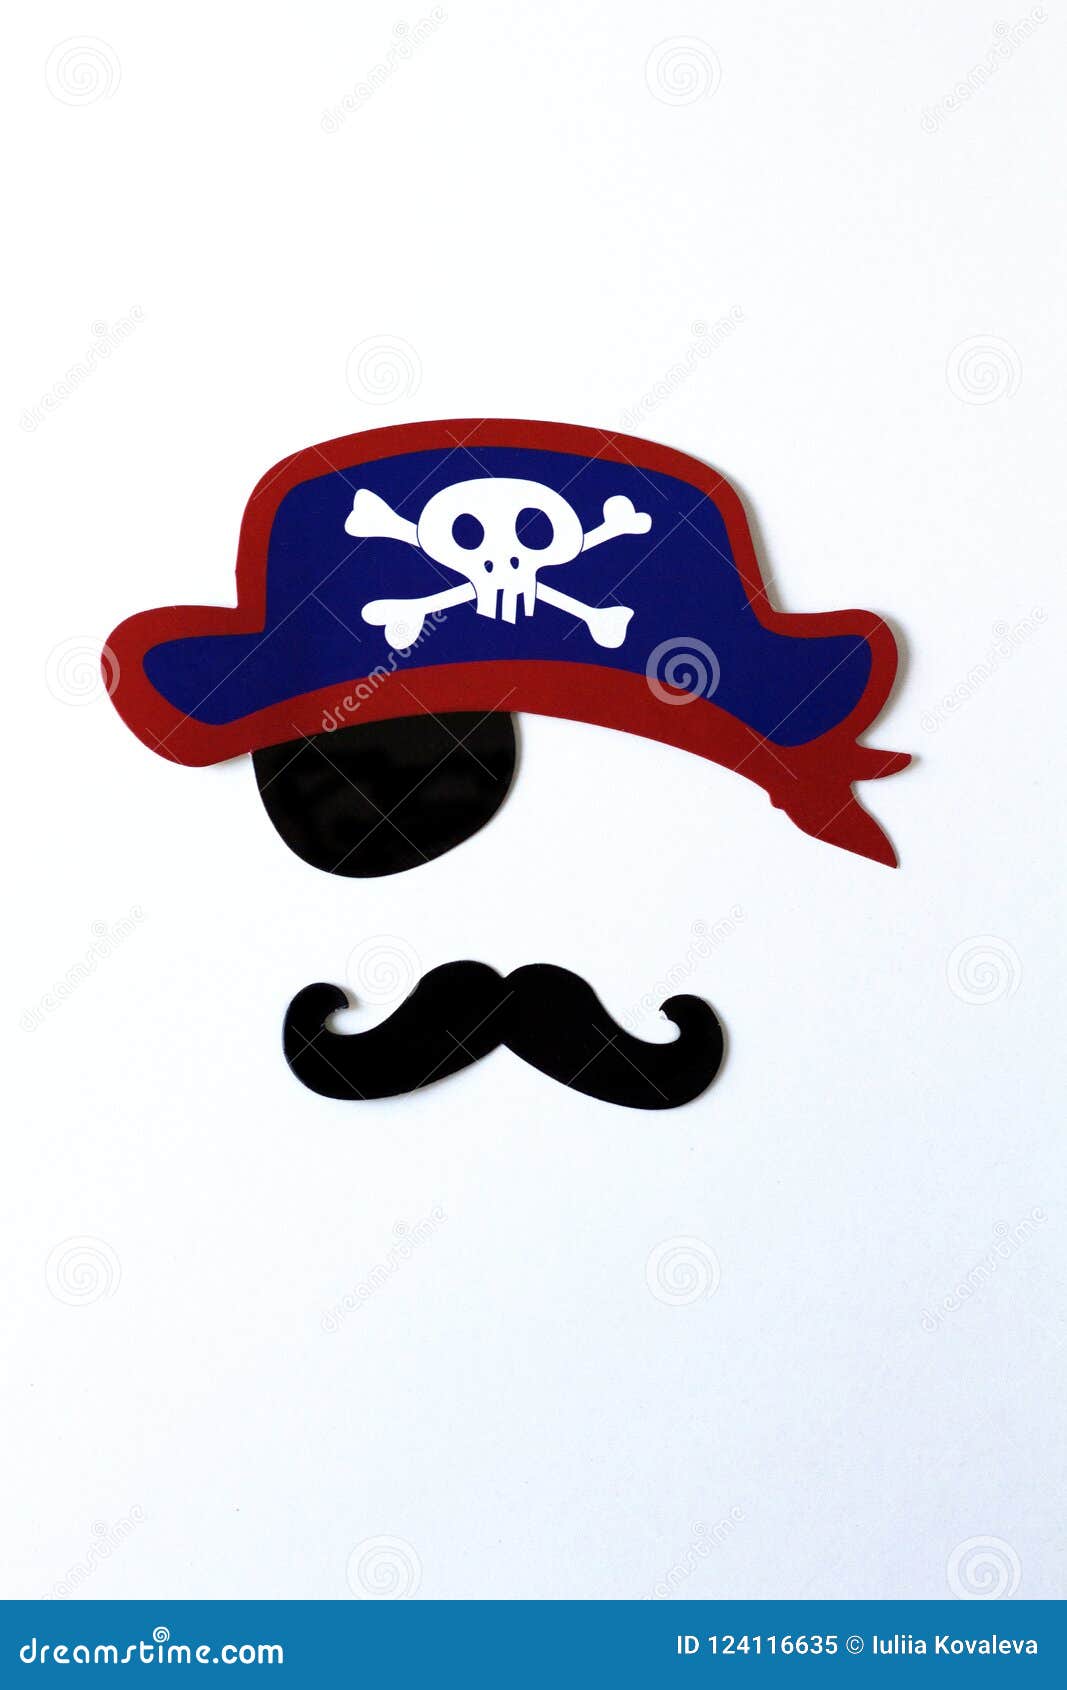 Paper Props for Holidays and Parties. Party for Halloween, Pirate